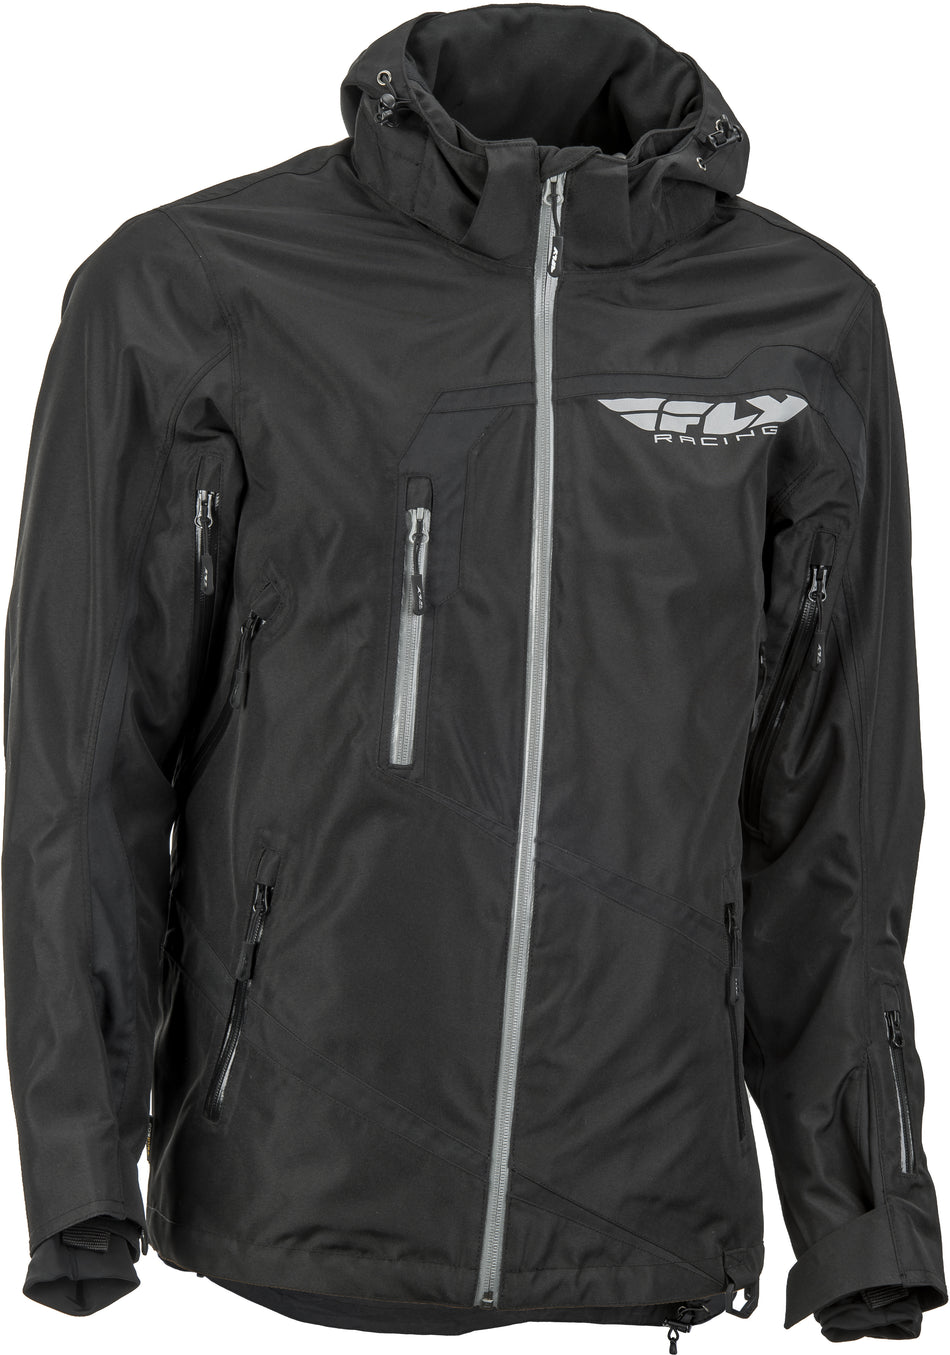 FLY RACING Fly Carbon Jacket Black Md 470-4040M